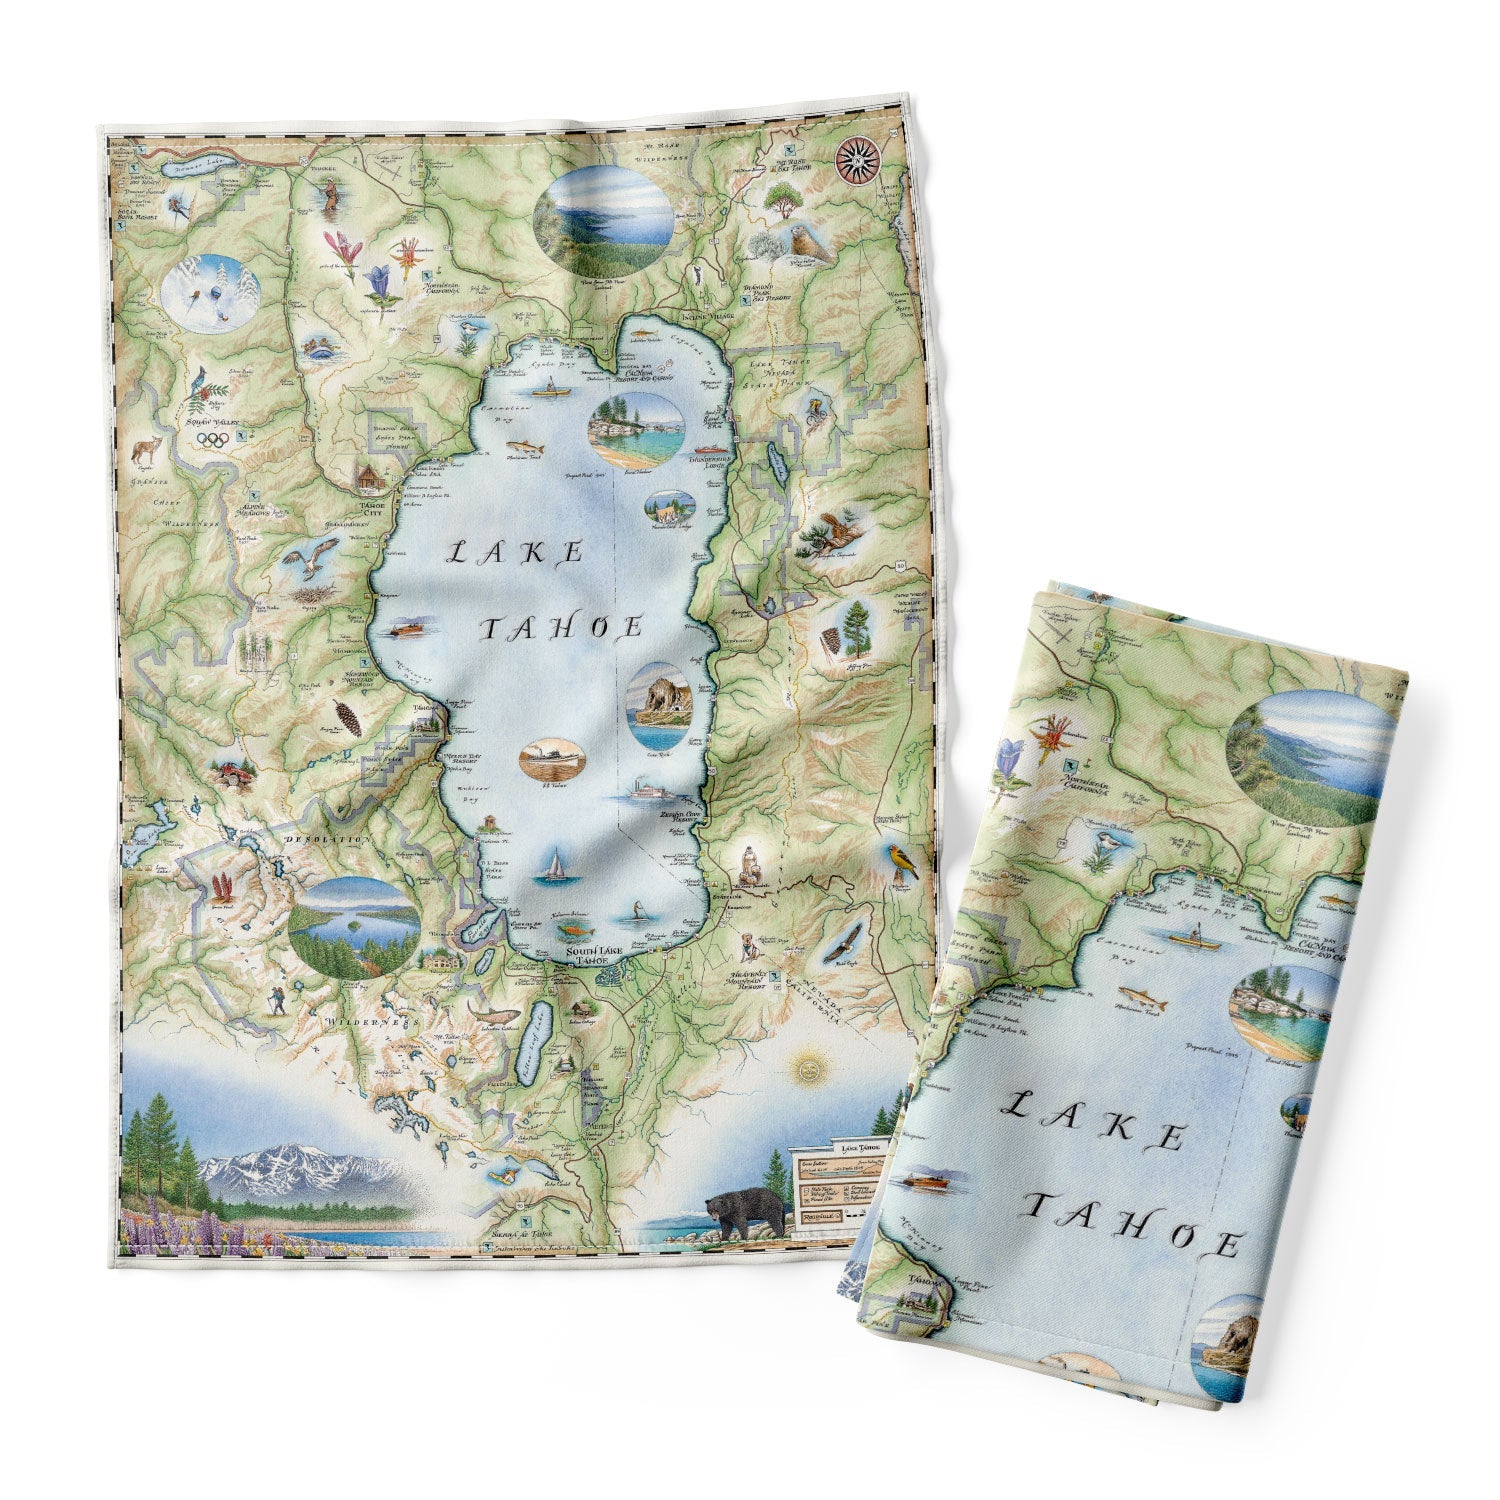 Lake Tahoe Map kitchen dishtowel in colors of greens and blues features the land's topography and the area favorites such as Emerald Bay, Cove Rock, Thunderbird Lodge, and Cal Neva Lodge & Resort. Native animals like black bears and birds with native plants are also represented on the map. 